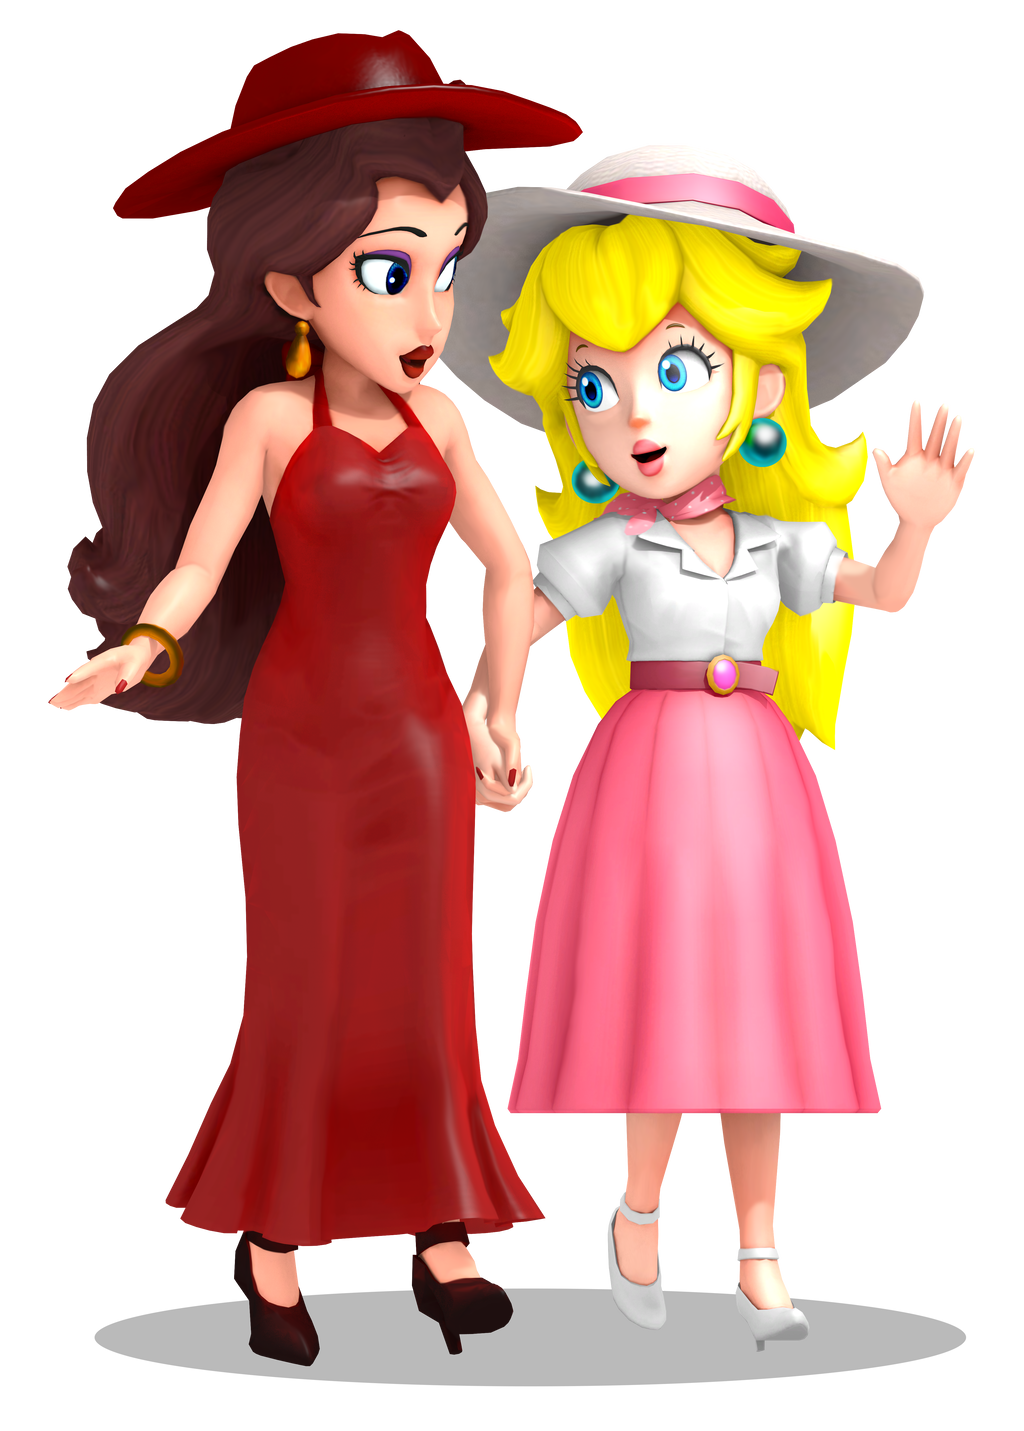 peach_x_pauline_by_fawfulthegreat64-dccgwsl.png